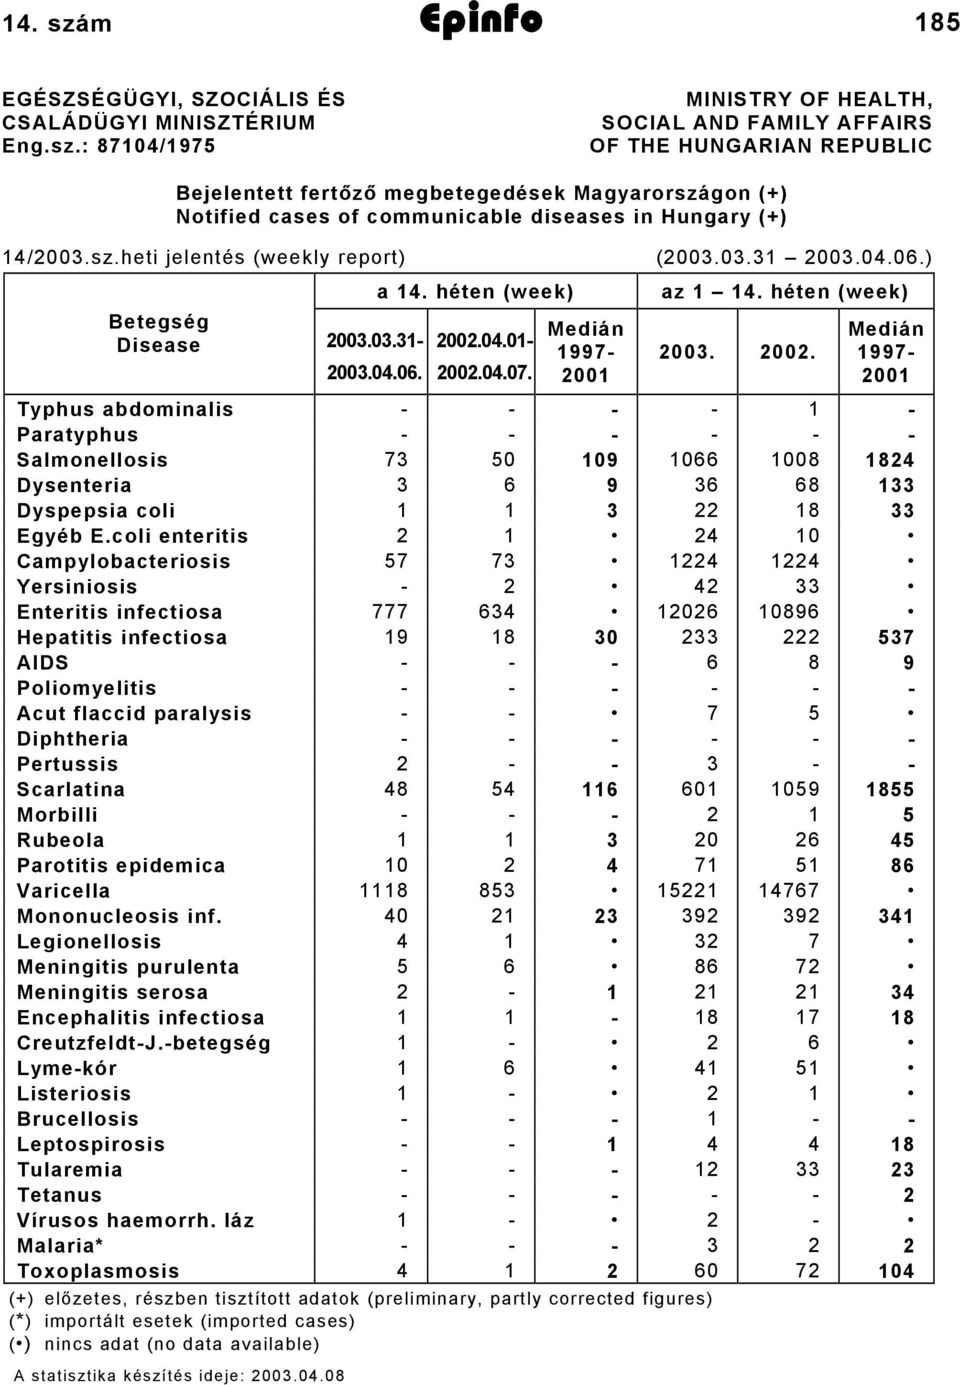 : 8704/975 MINISTRY OF HEALTH, SOCIAL AND FAMILY AFFAIRS OF THE HUNGARIAN REPUBLIC Bejelentett fertőző megbetegedések Magyarországon (+) Notified cases of communicable diseases in Hungary (+) 4/2003.